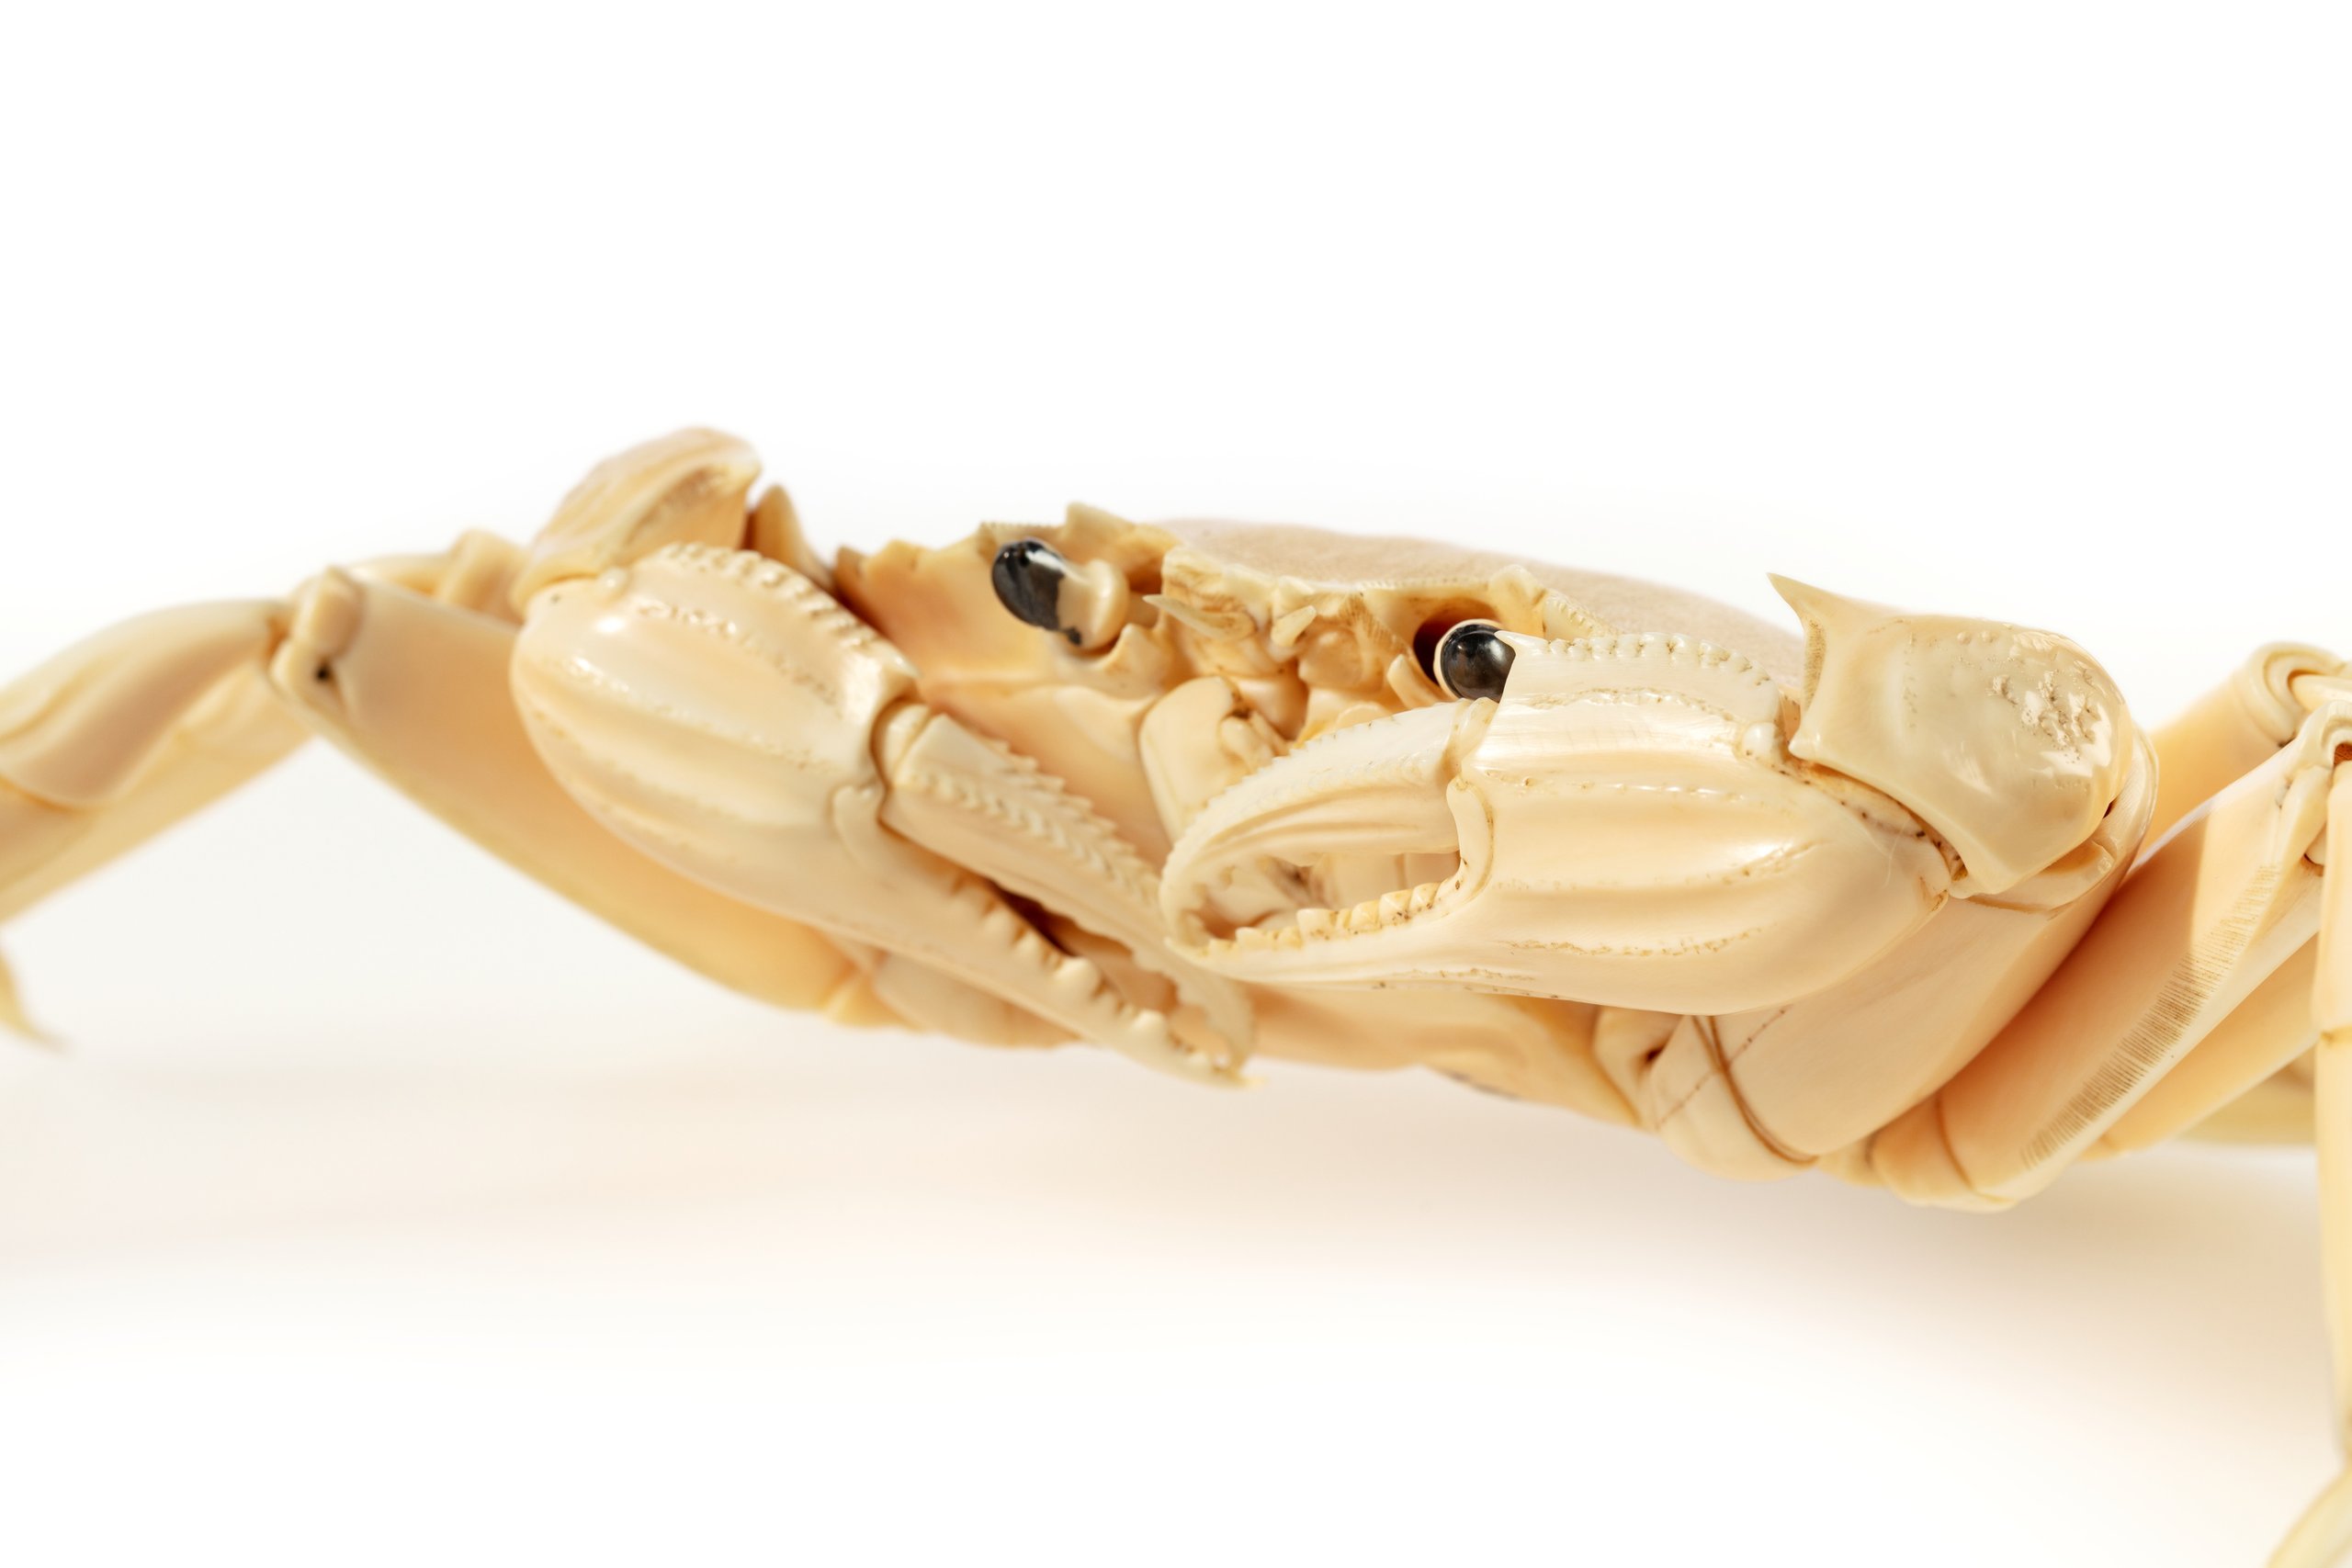 Carved ivory crab figure